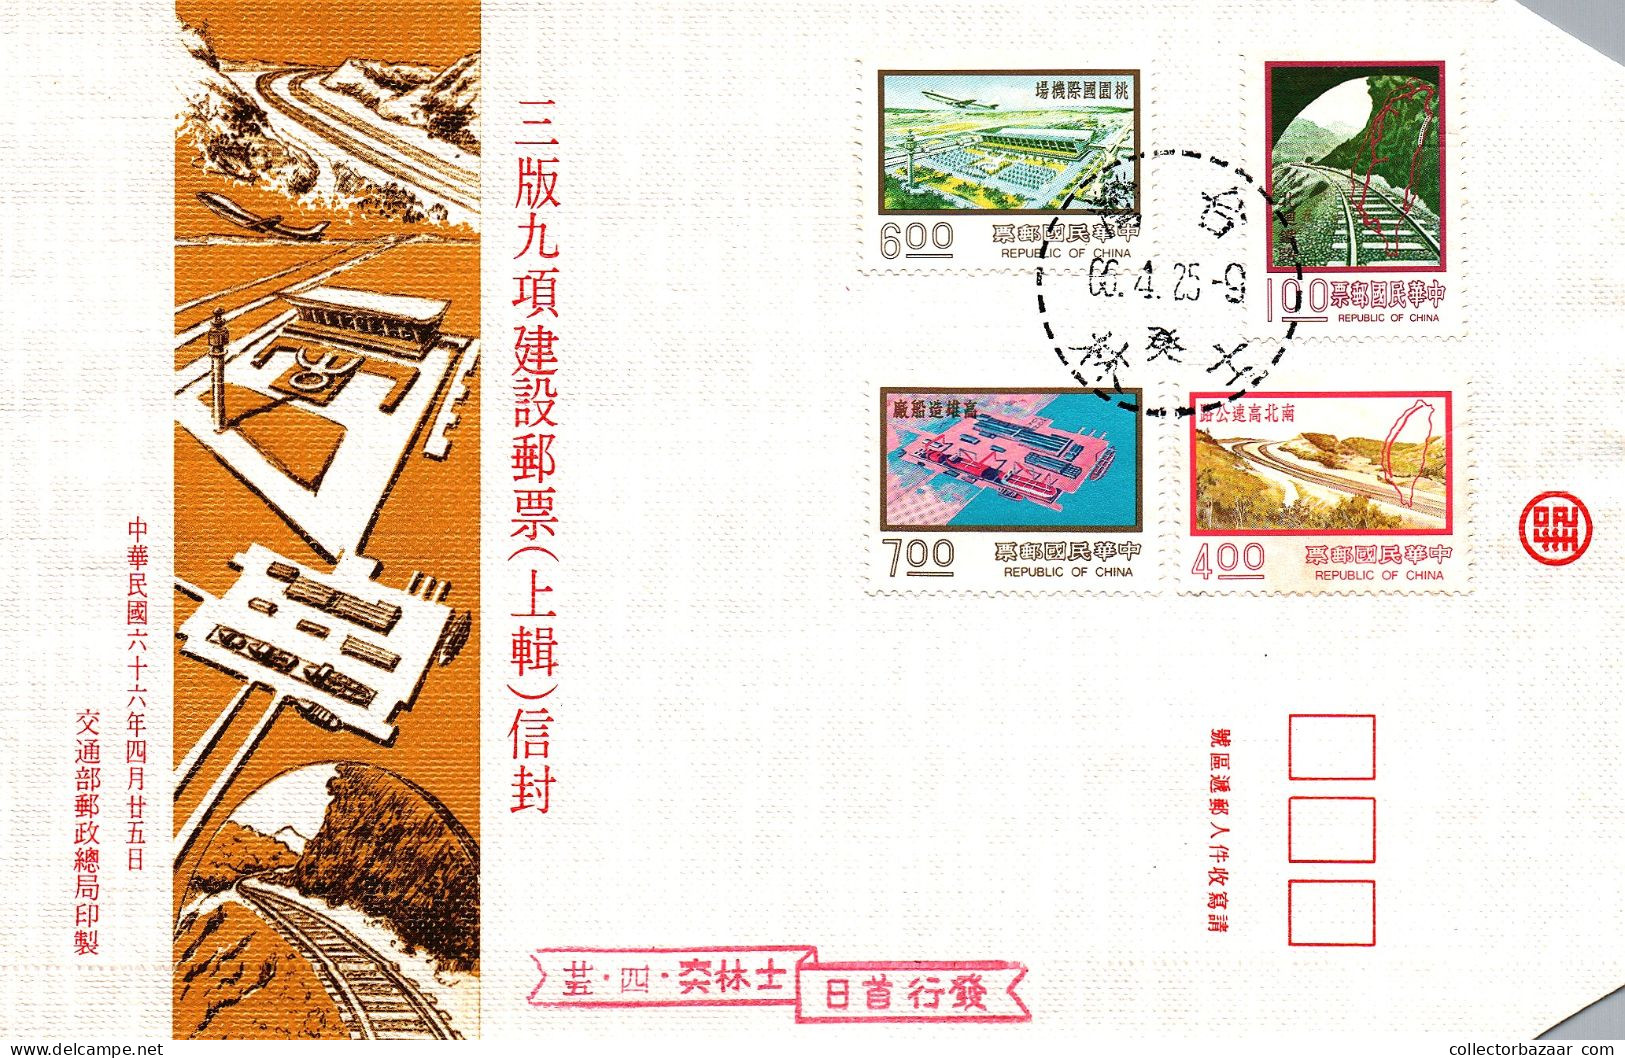 Taiwan Formosa Republic Of China FDC Airplane Route Airport Railway Transport Port- 7$,6$,4$ And 1$ Stamps - FDC